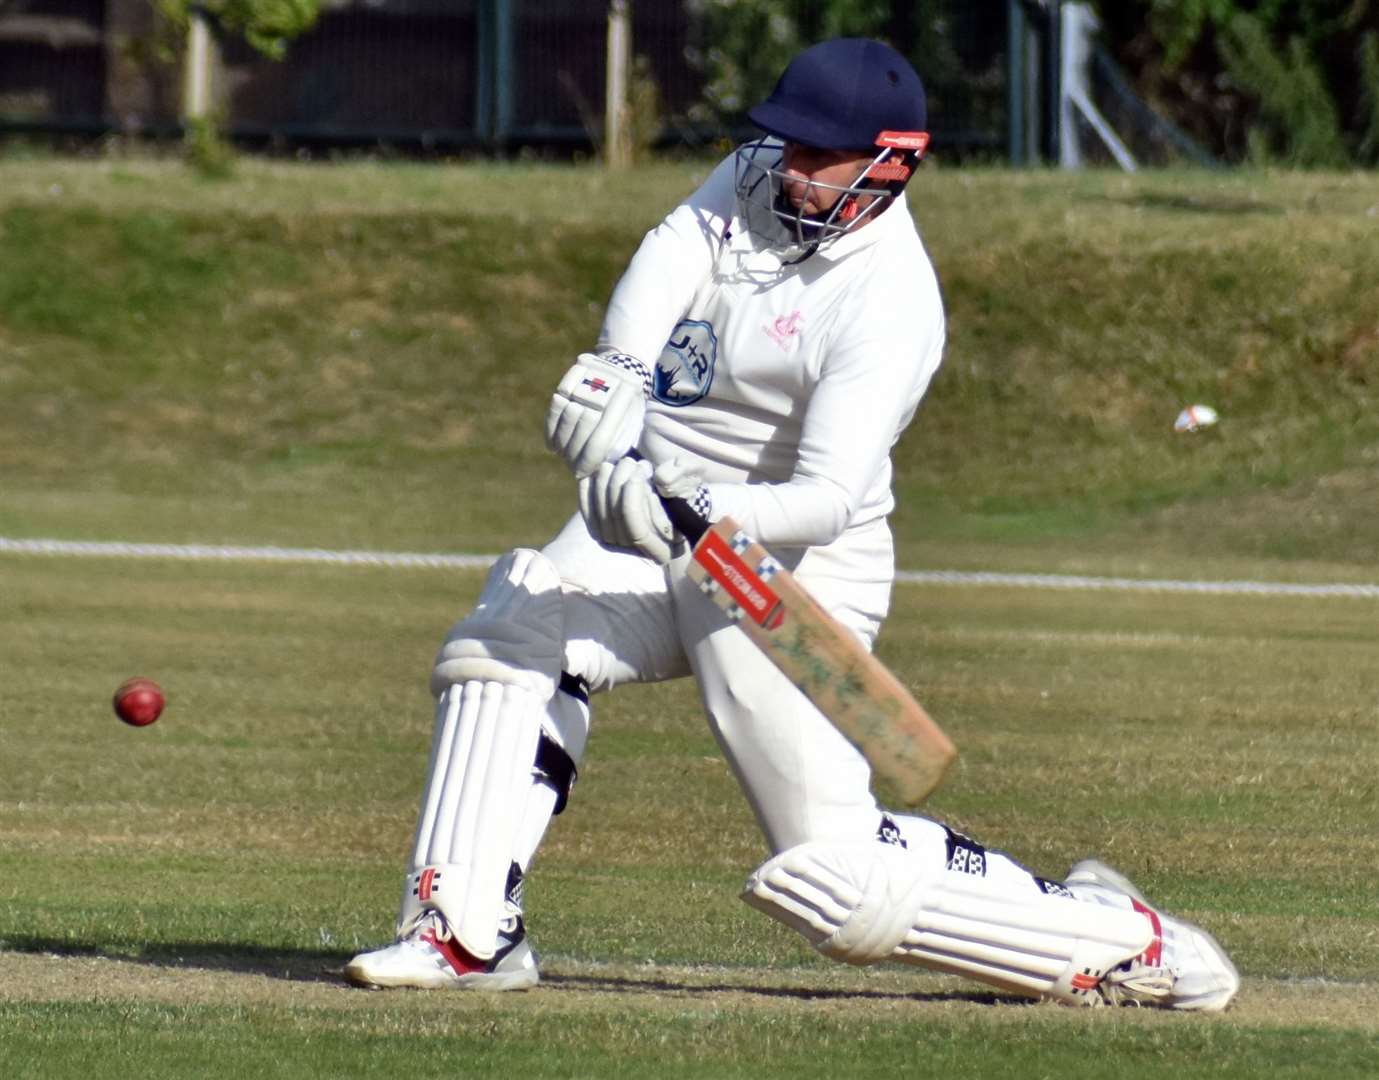 James Tredwell, pictured batting for Folkestone against Bickley Park this season, is the last Kent men’s player to captain England – doing so in 2013. Picture: Randolph File